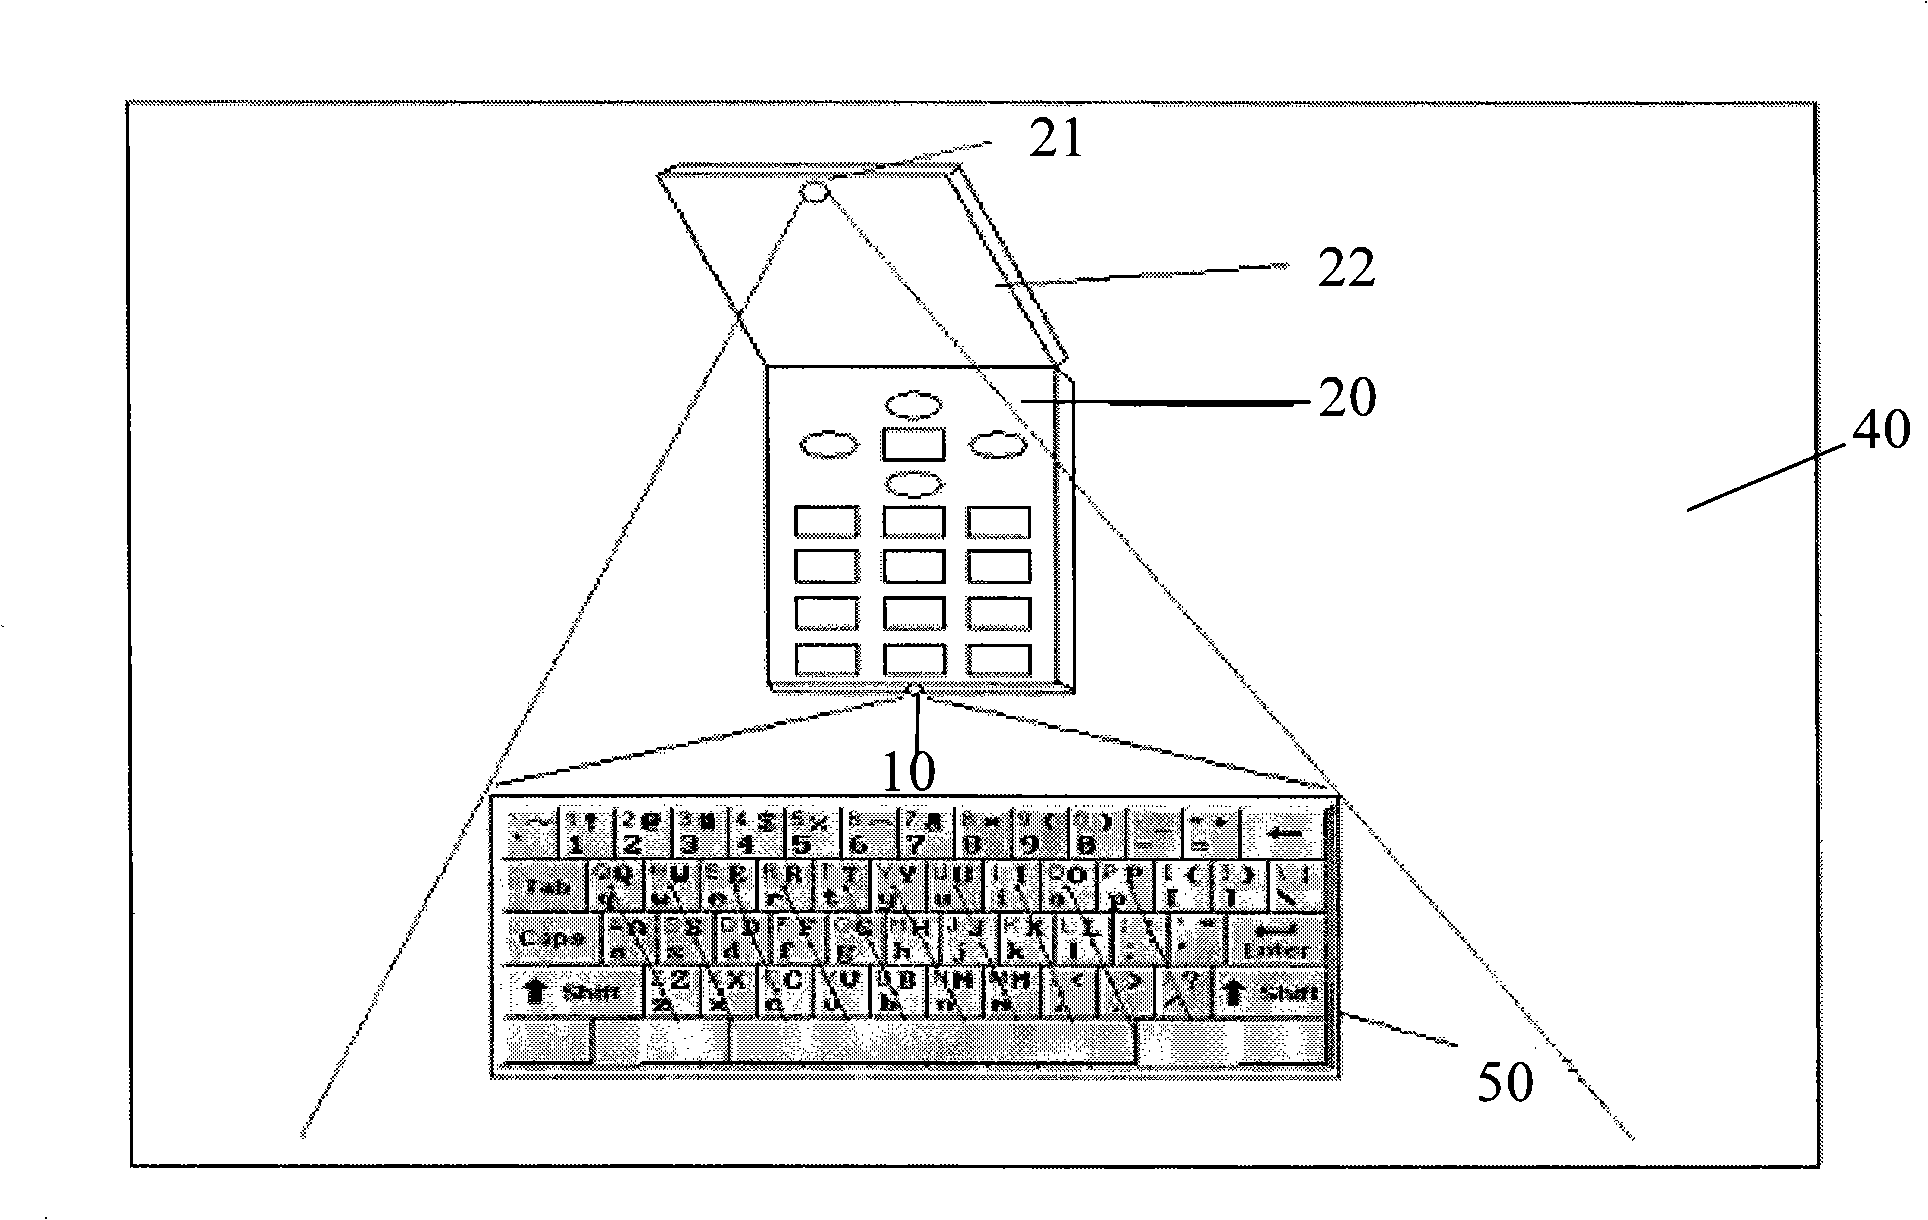 Full-functional press-key mobile phone and inputting method